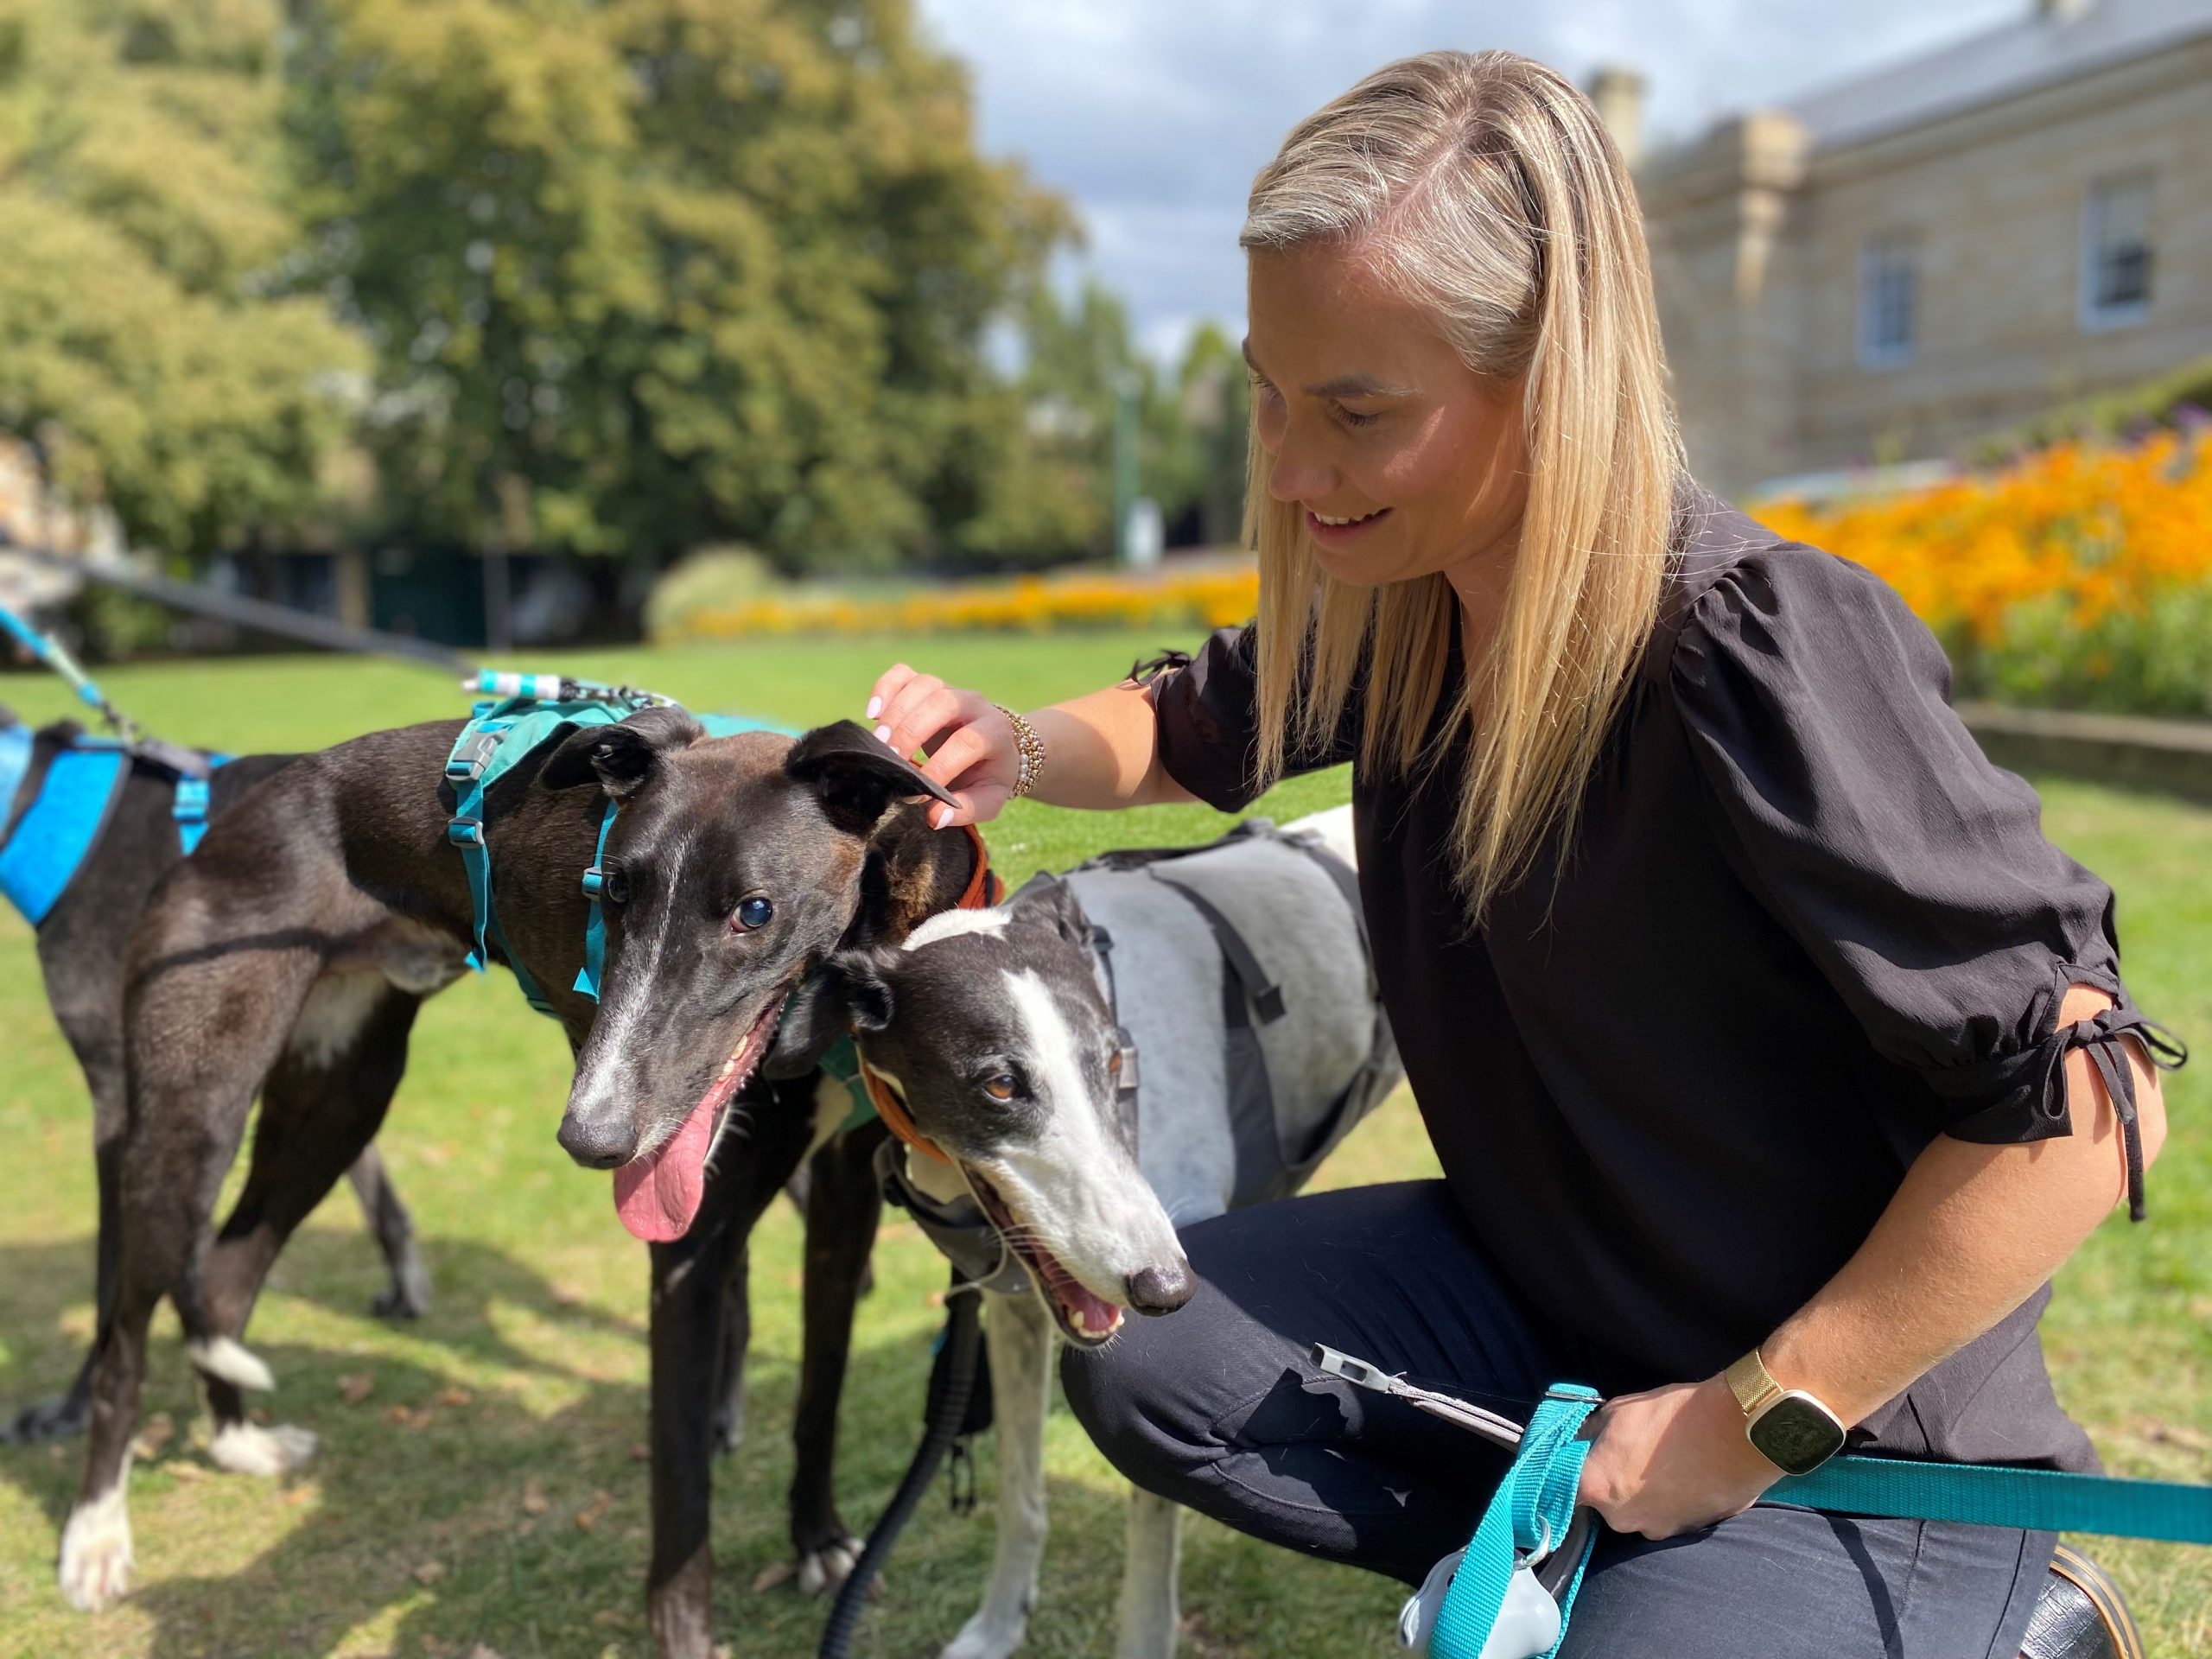 It’s time to root out bad apples and adopt a sensible approach to make sure greyhounds have a safe future